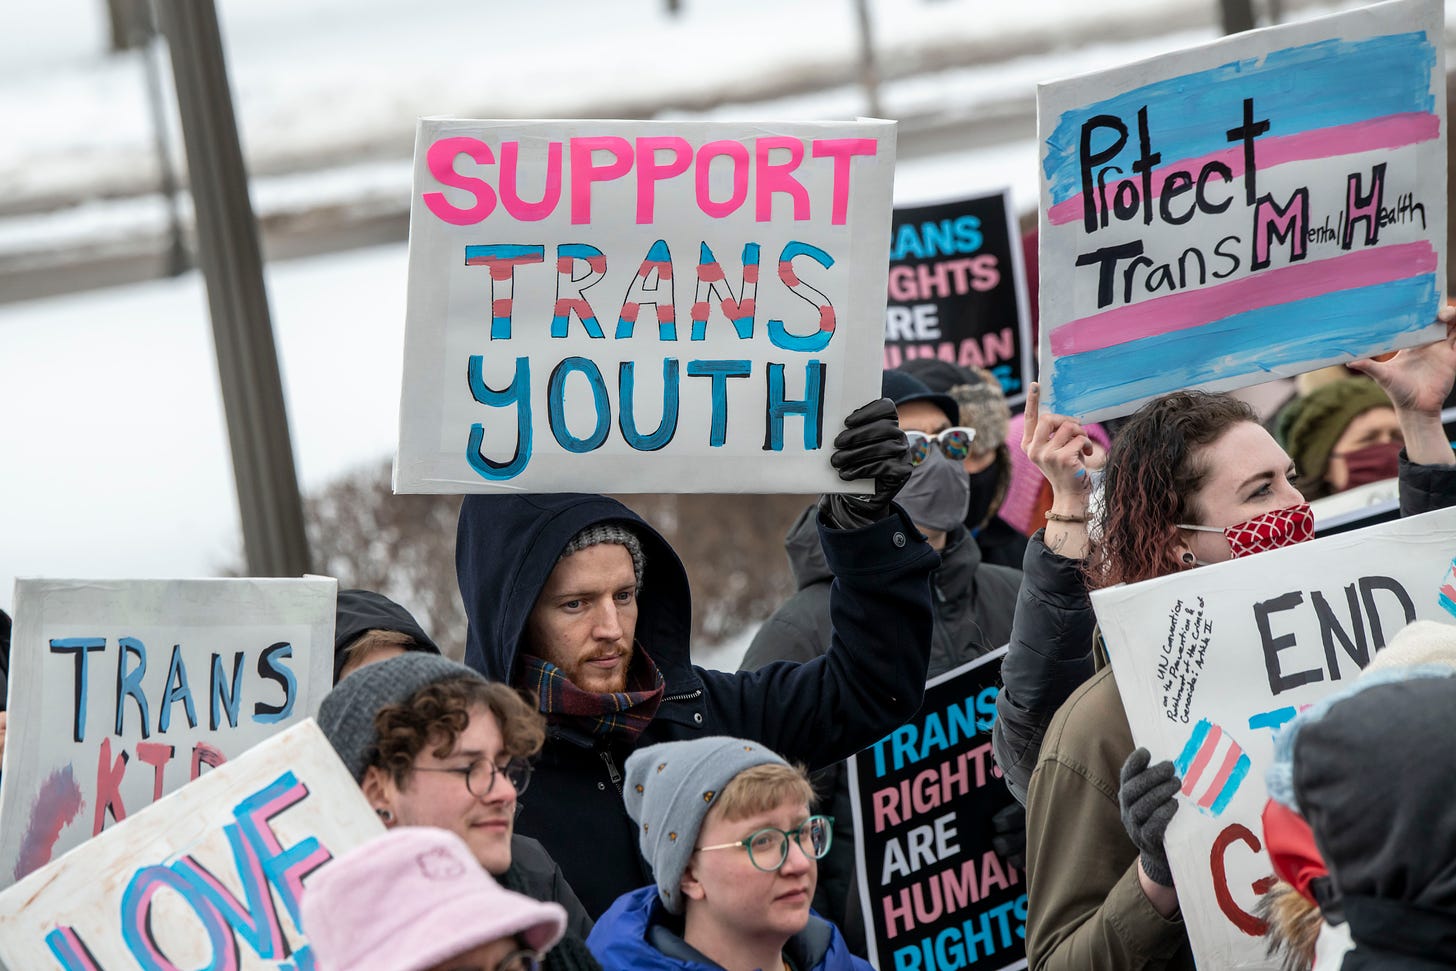 Protestors standing together holding signs urging our politicians to protect trans youth.